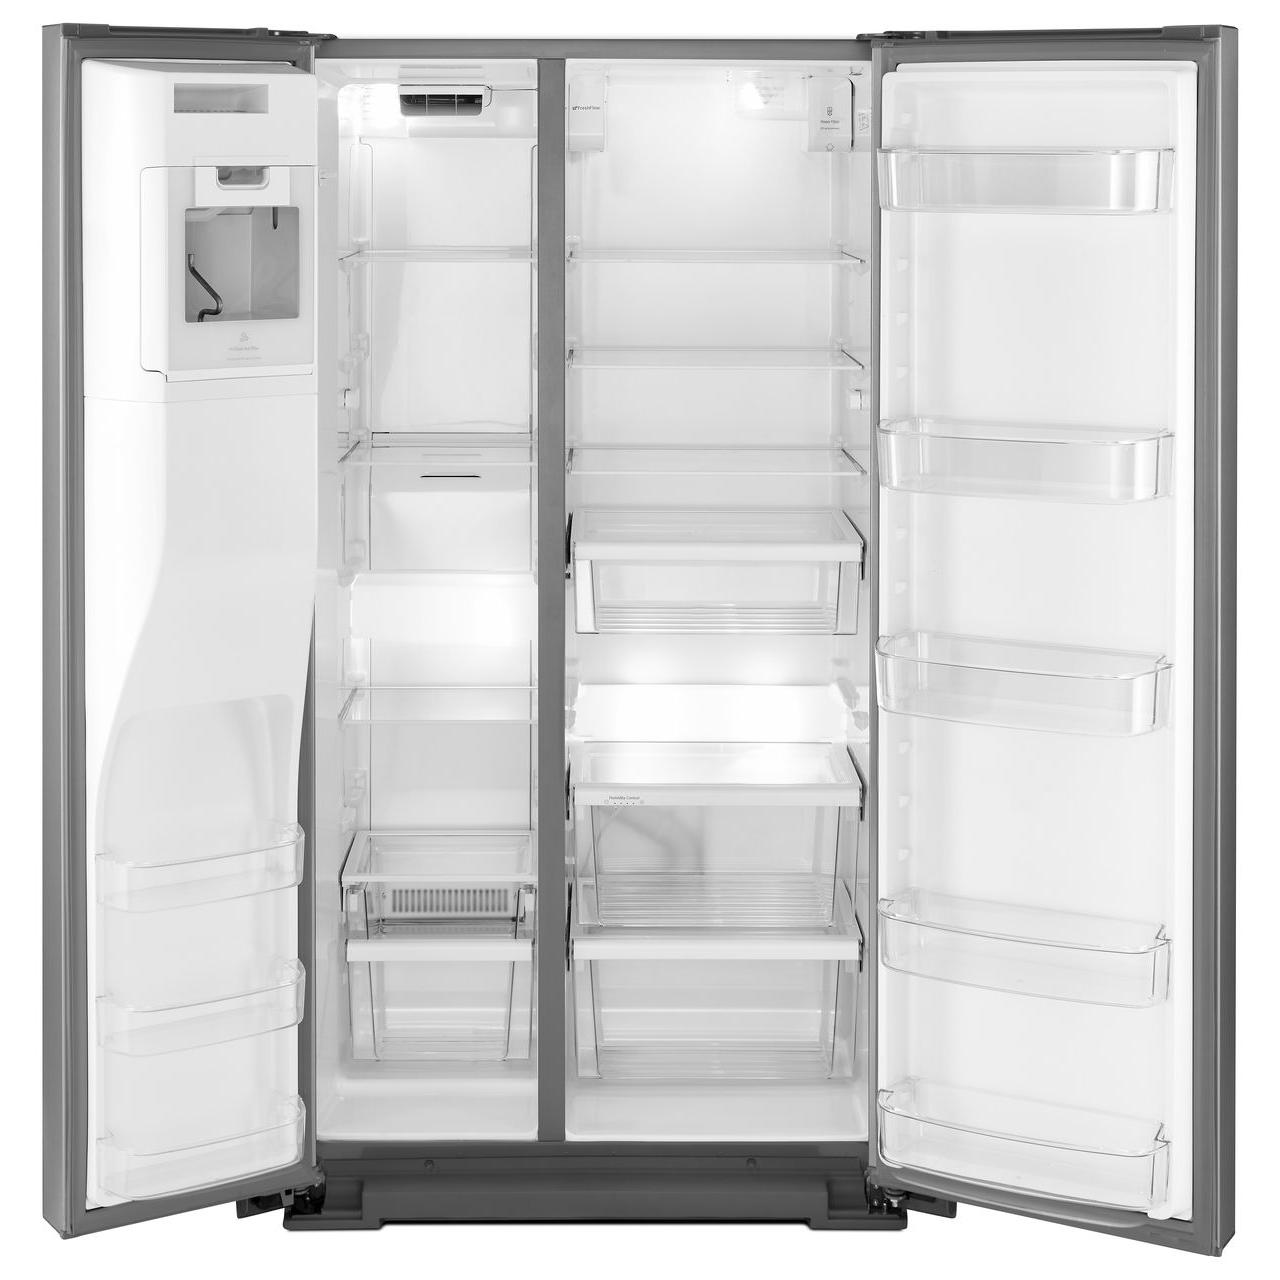 36-inch, 20.59 cu.ft. Counter-Depth, Side-by-side Refrigerator with External Water and ice Dispensing System with EveryDrop™ Filtration WRSA71CIHZ